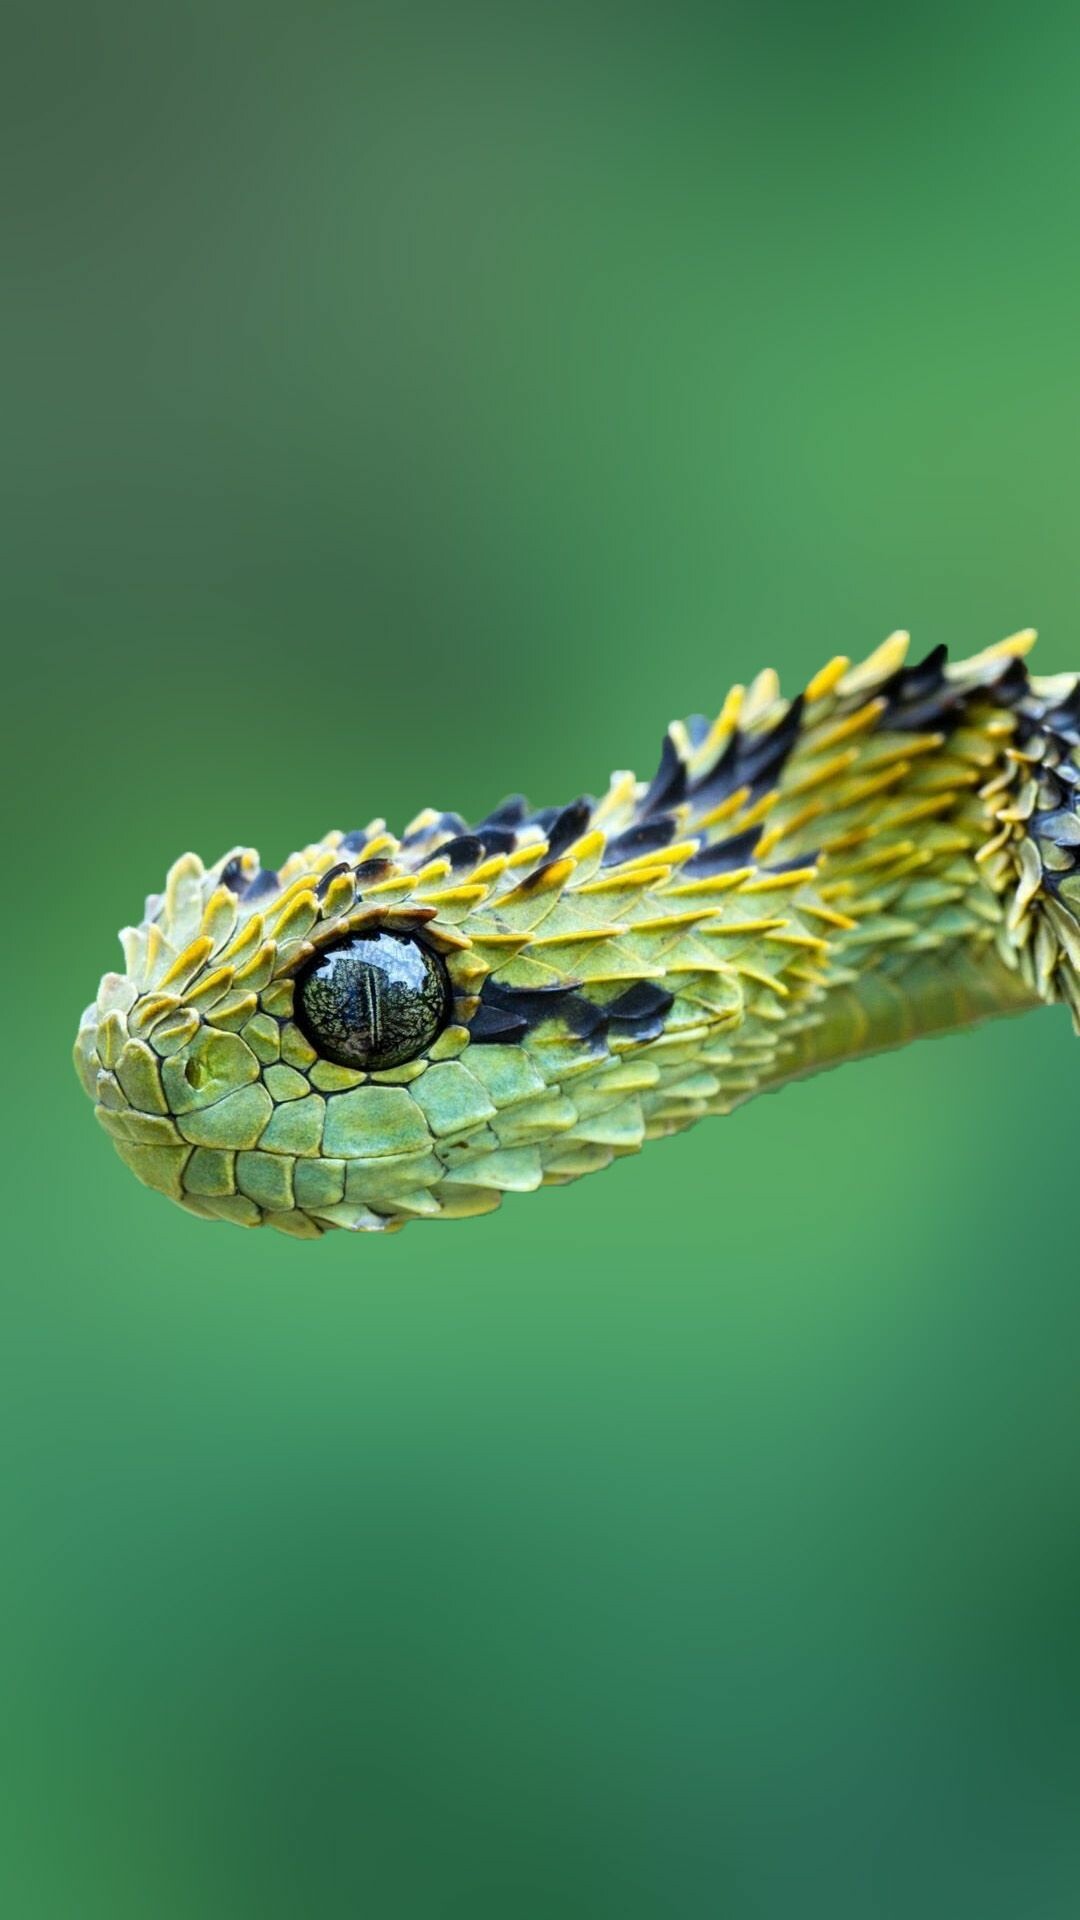 Snake: Have long, slender bodies and lack of legs, eyelids, or ear flaps. 1080x1920 Full HD Background.